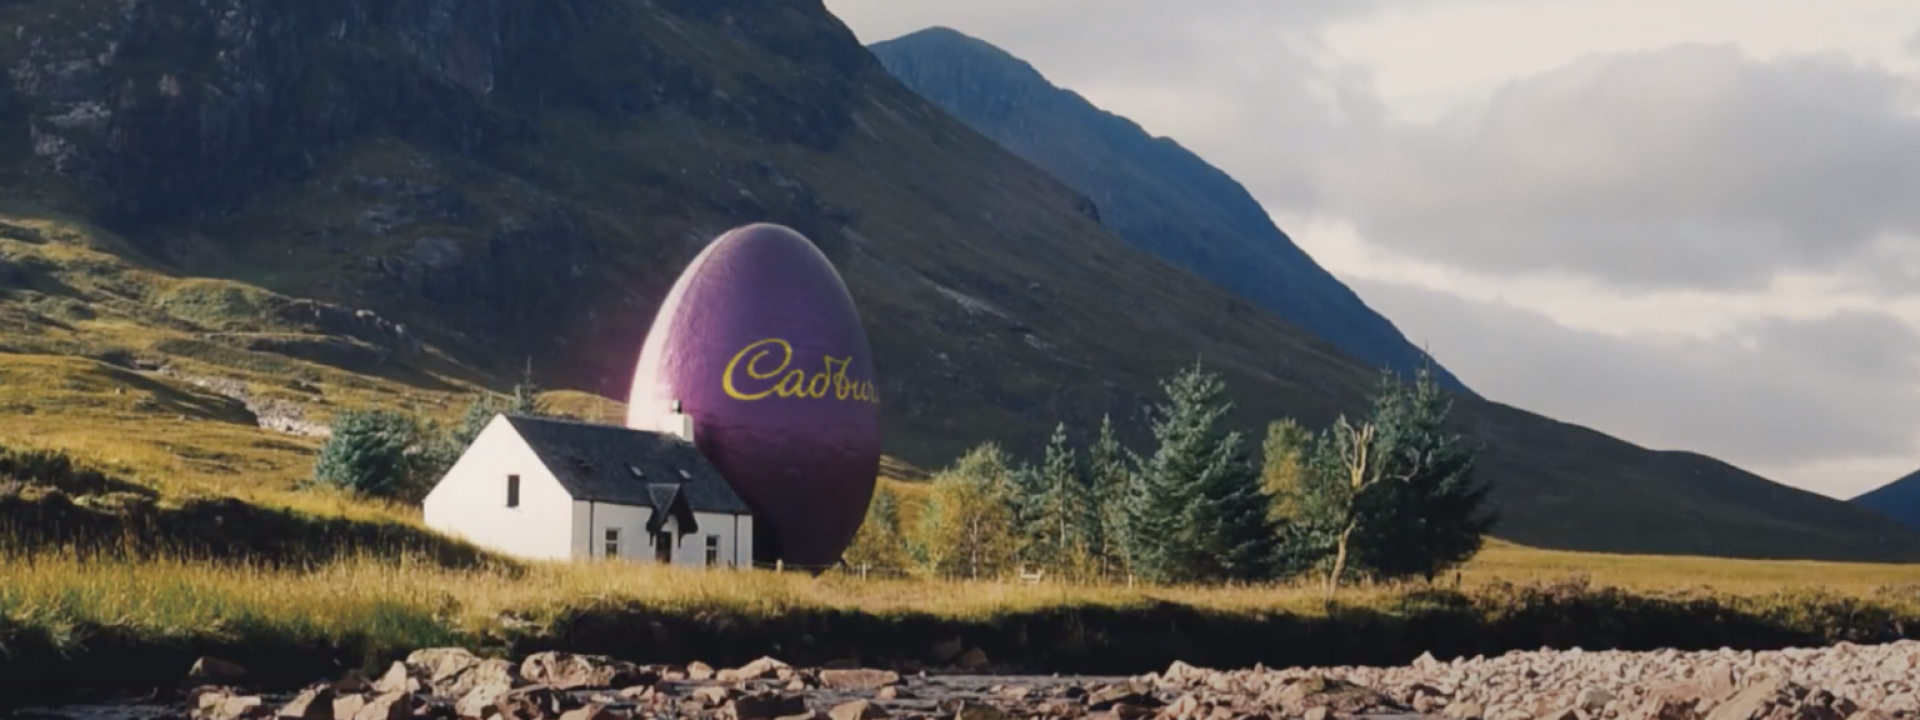 Countryside landscape scene with a giant purple Cadbury branded egg placed next to a house